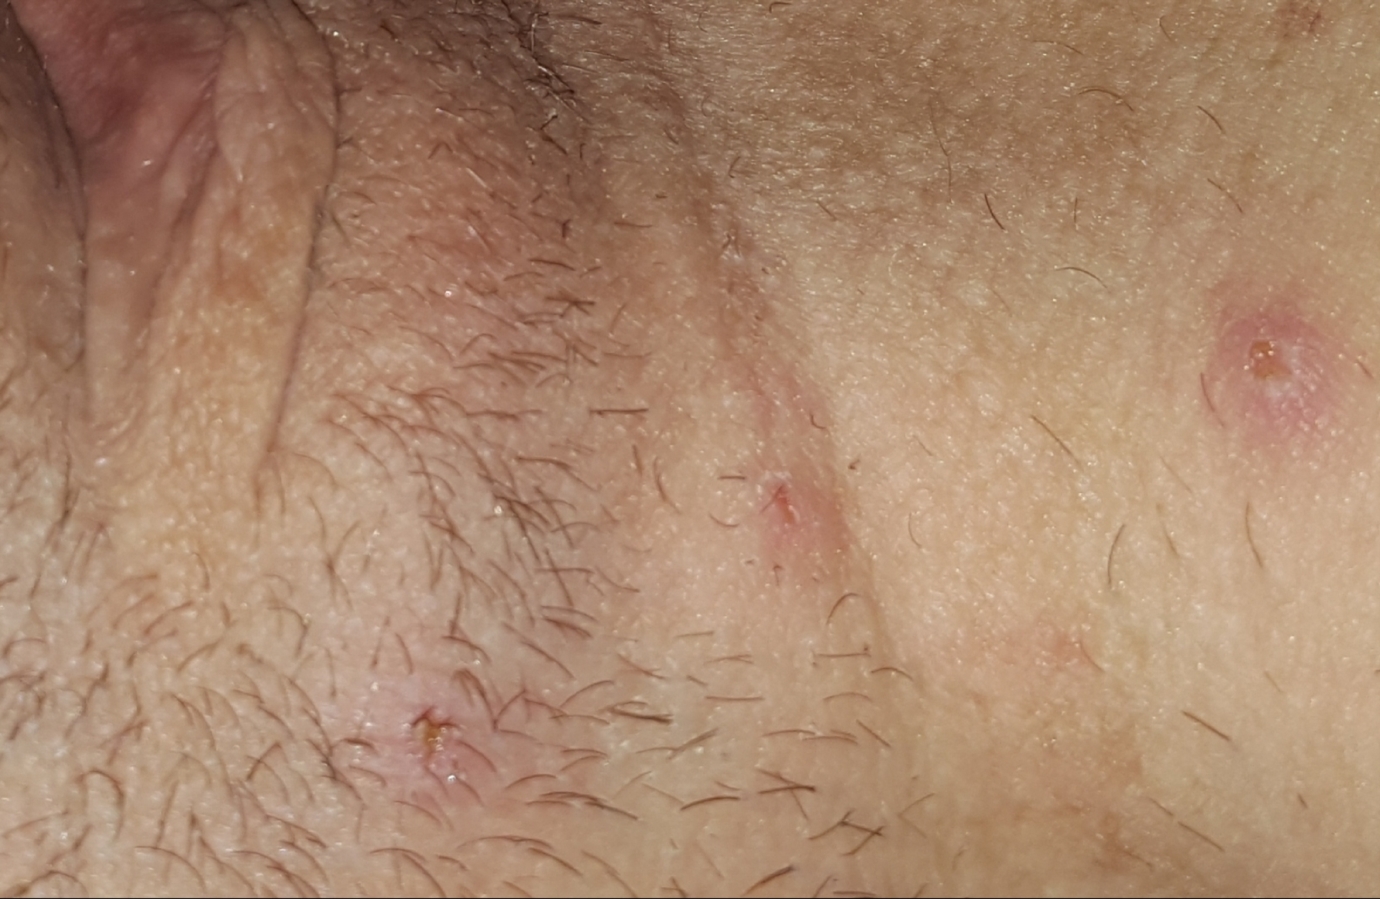 Infected/ingrown hairs or herpes..? | Sexual Health | Forums | Patient